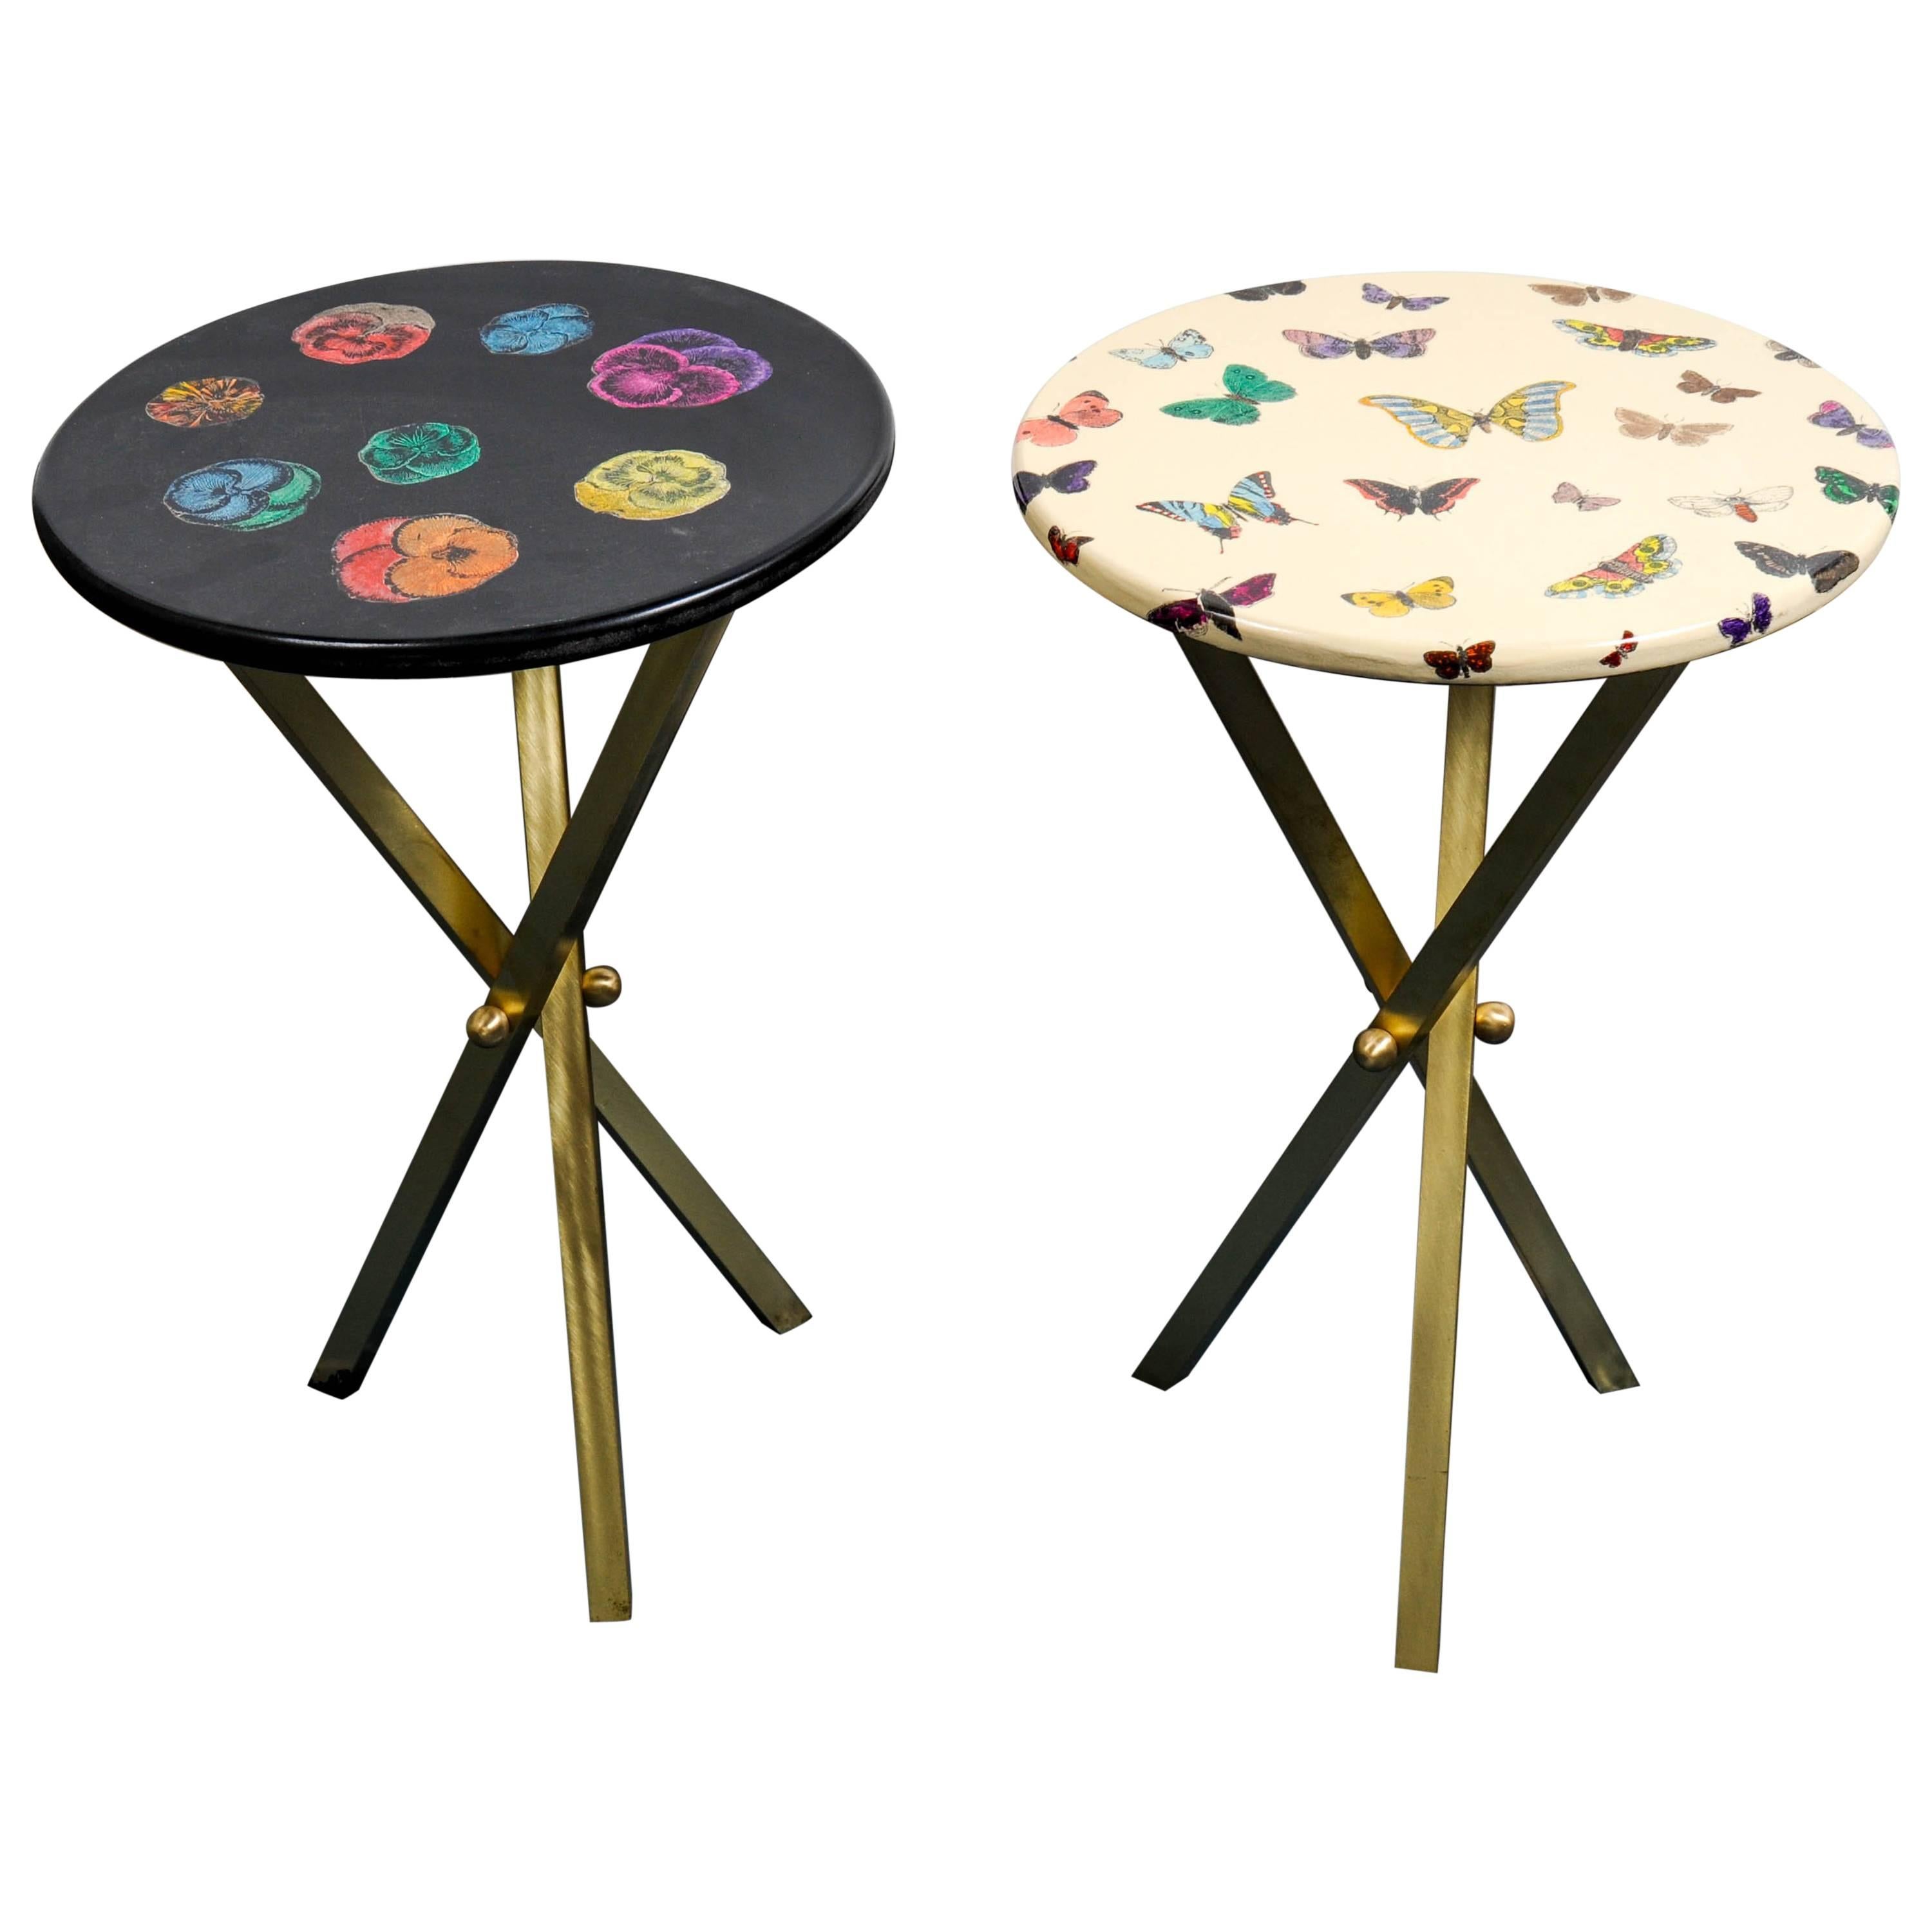 Pair of Side Tables by Piero Fornasetti